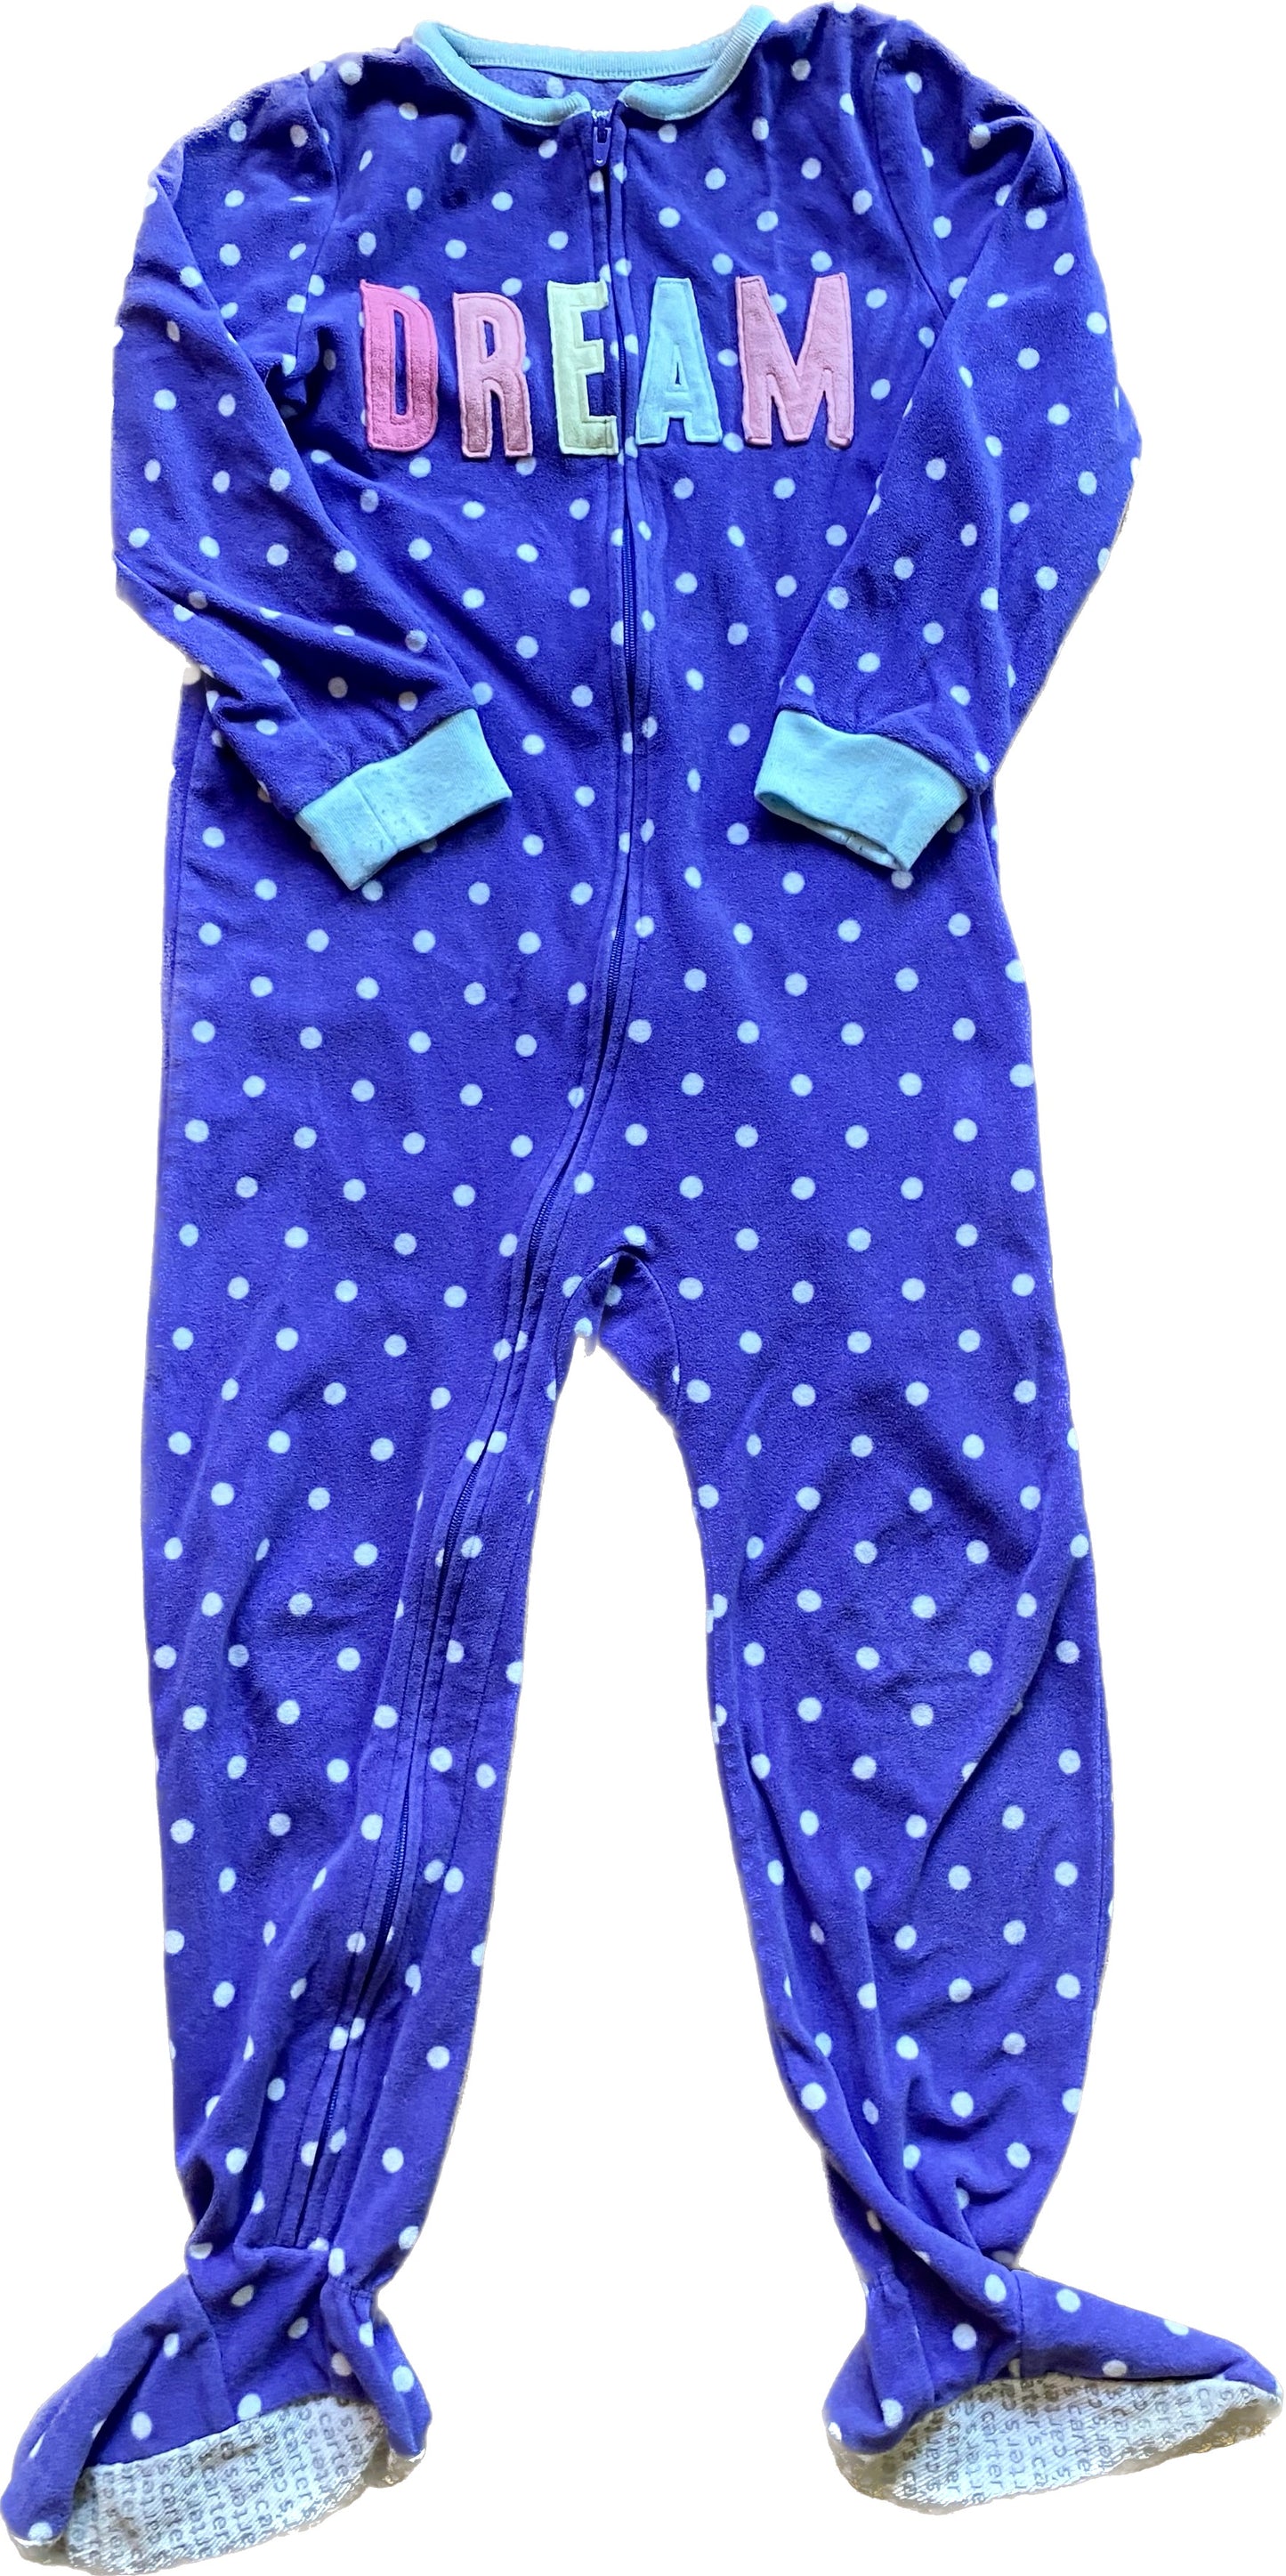 REDUCED Size 5 Carters fleece footed pajamas